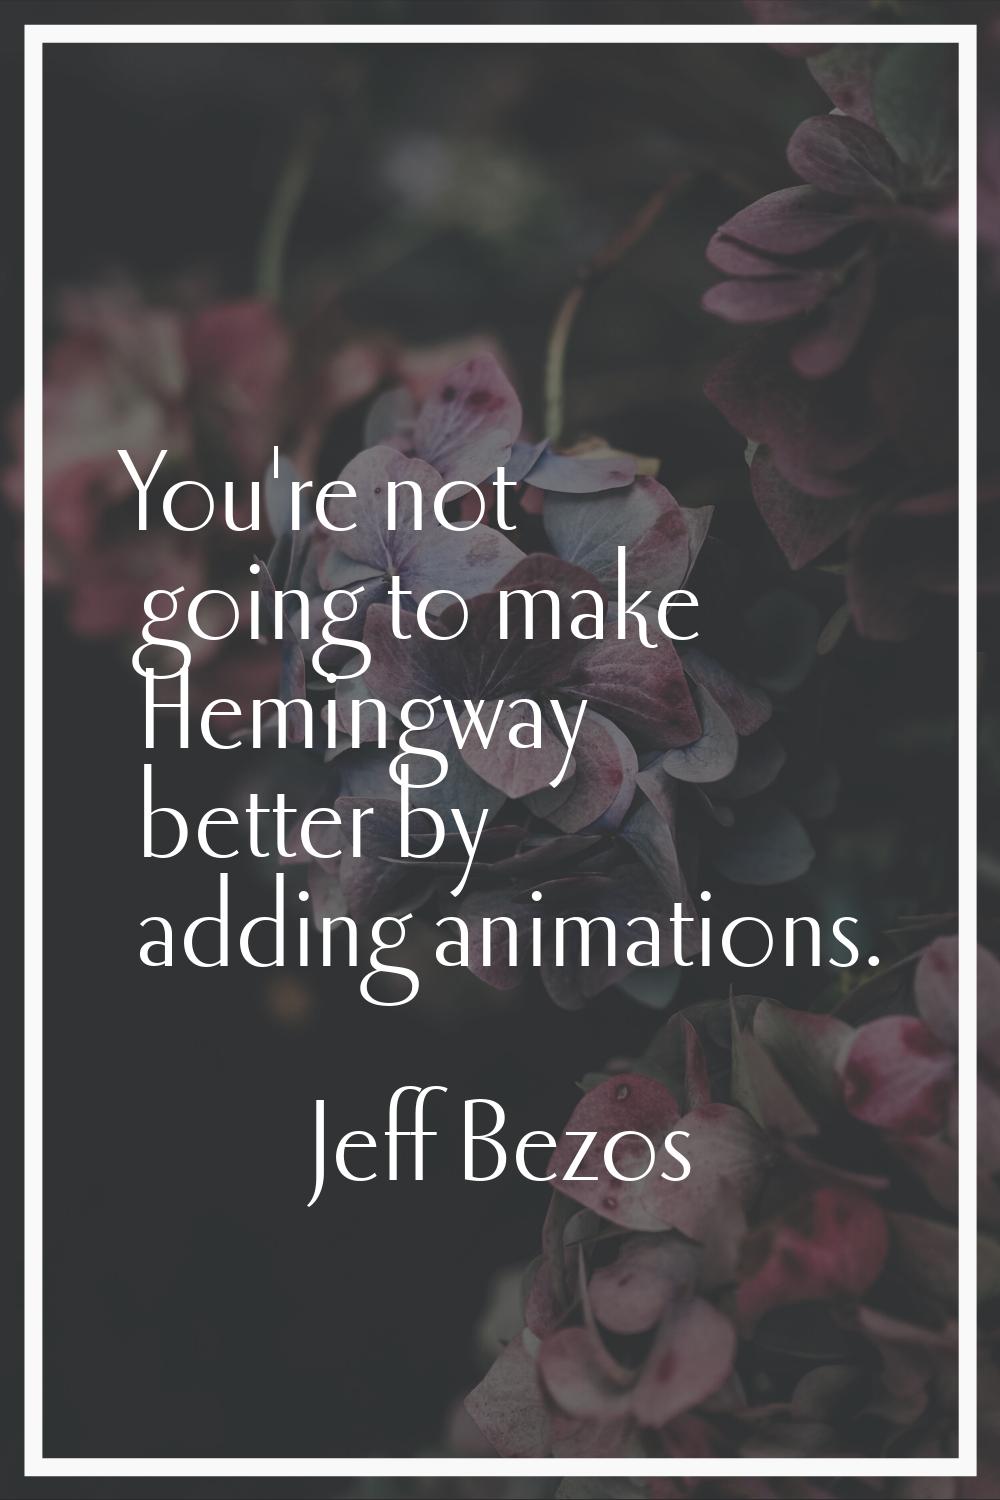 You're not going to make Hemingway better by adding animations.